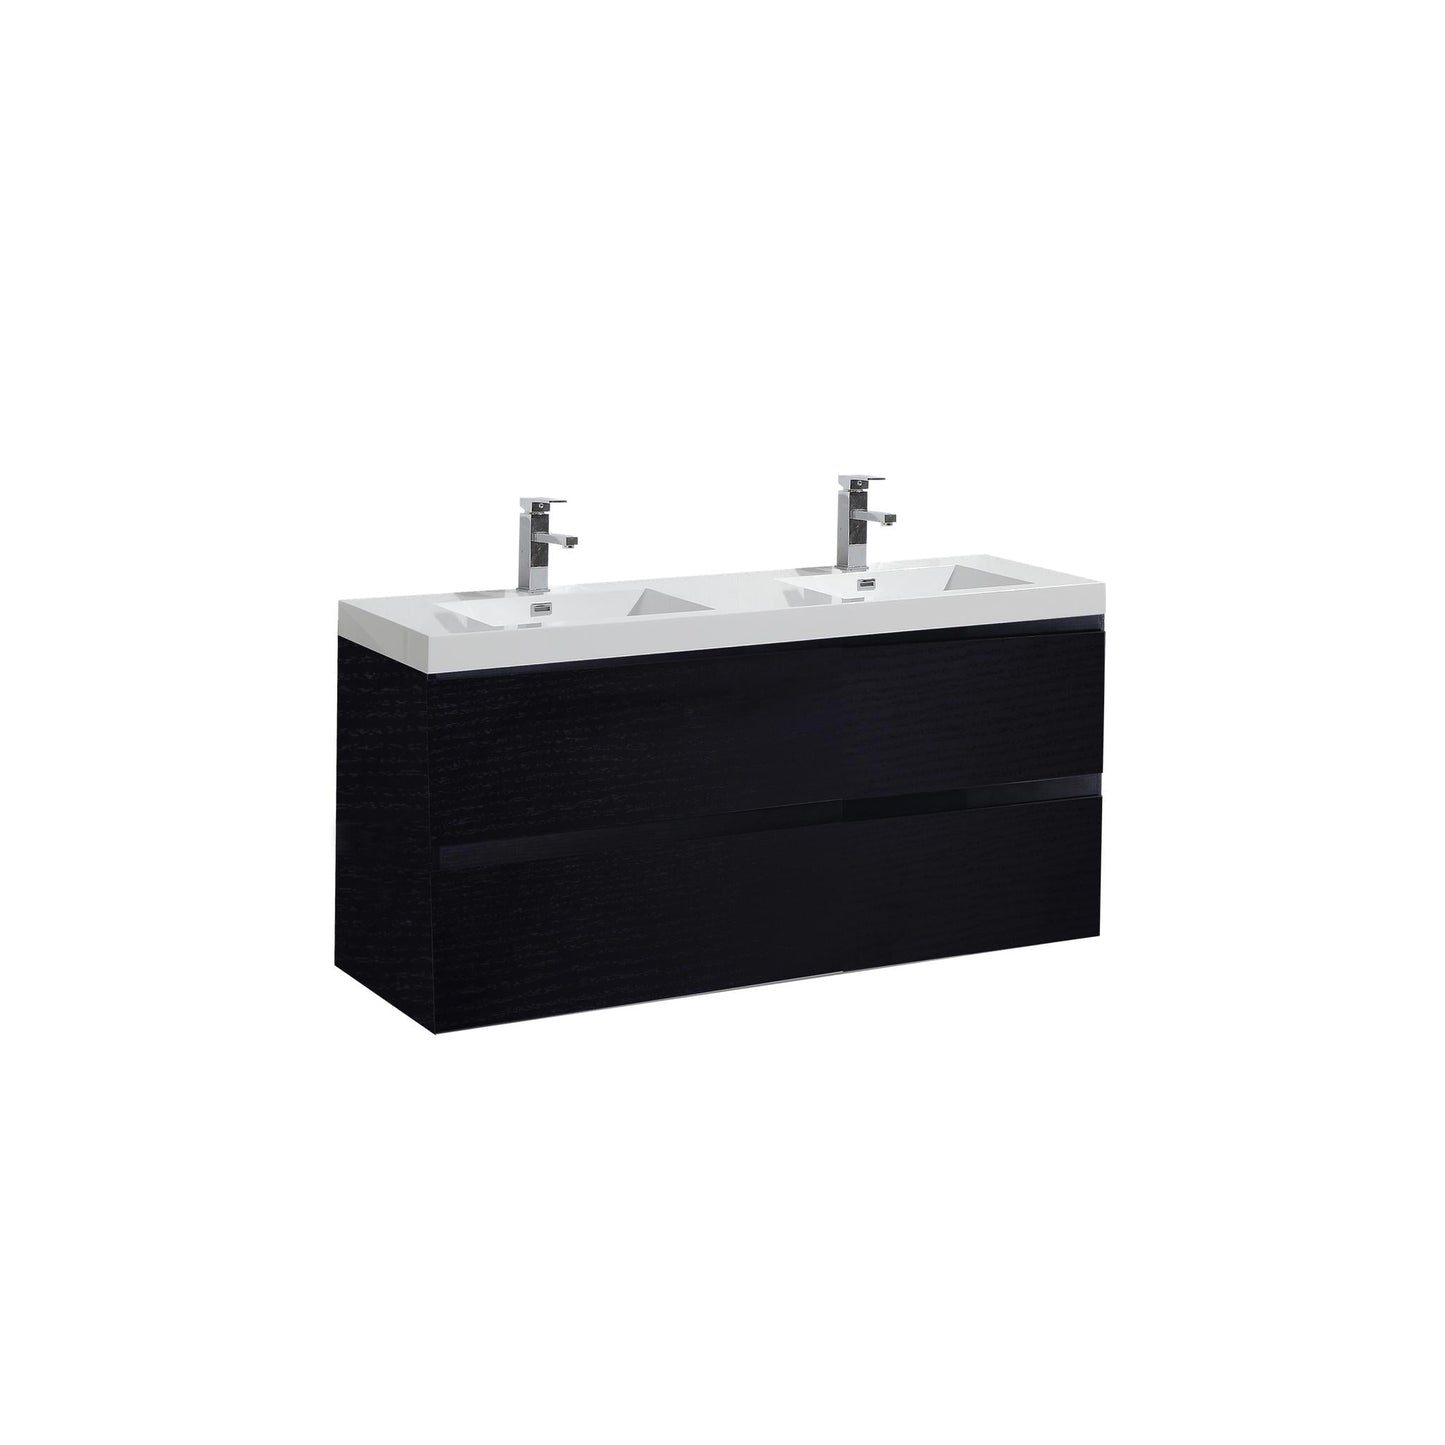 Moreno Bath Bohemia Lina 48" Rich Black Wall-Mounted Vanity With Double Reinforced White Acrylic Sinks